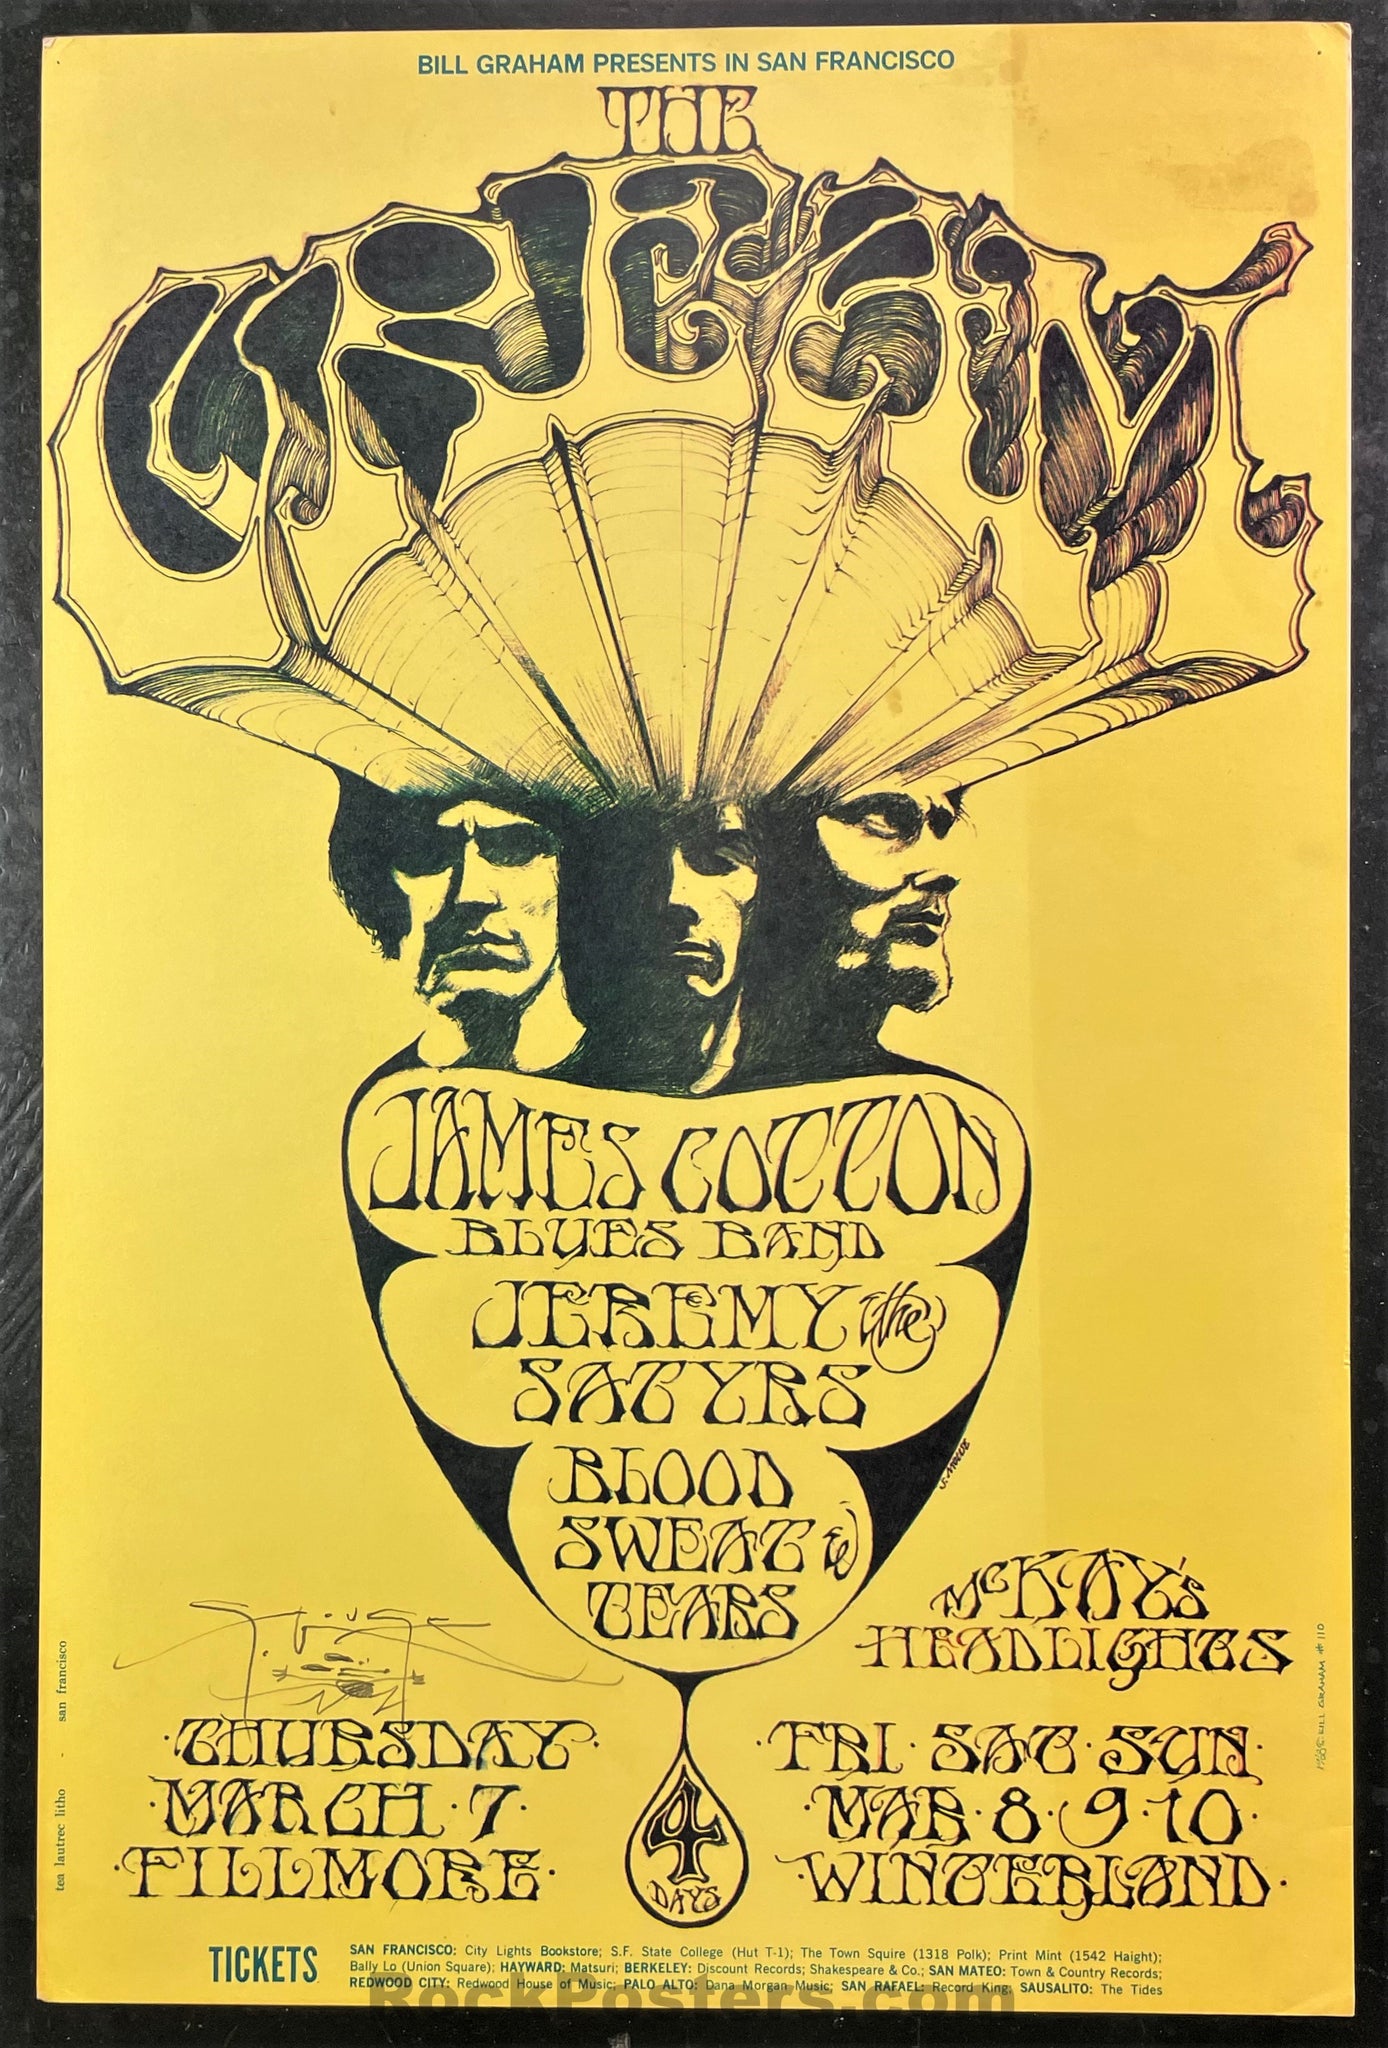 AUCTION - BG-110 - Cream - Stanley Mouse SIGNED - 1968 Poster - Fillmore Auditorium - Very Good